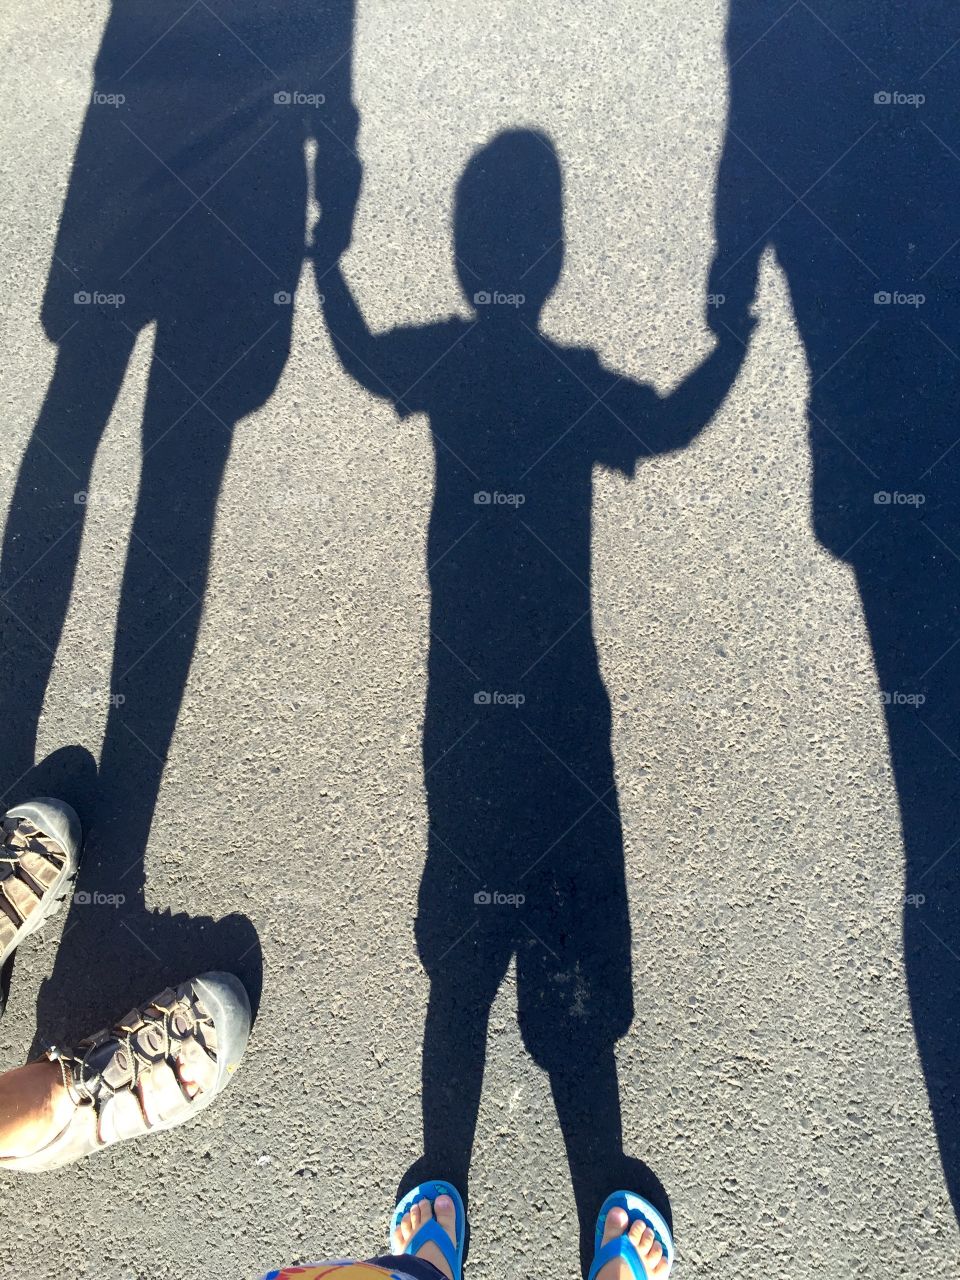 This is a shadow photo of my husband, my grandson, and myself as we took a walk